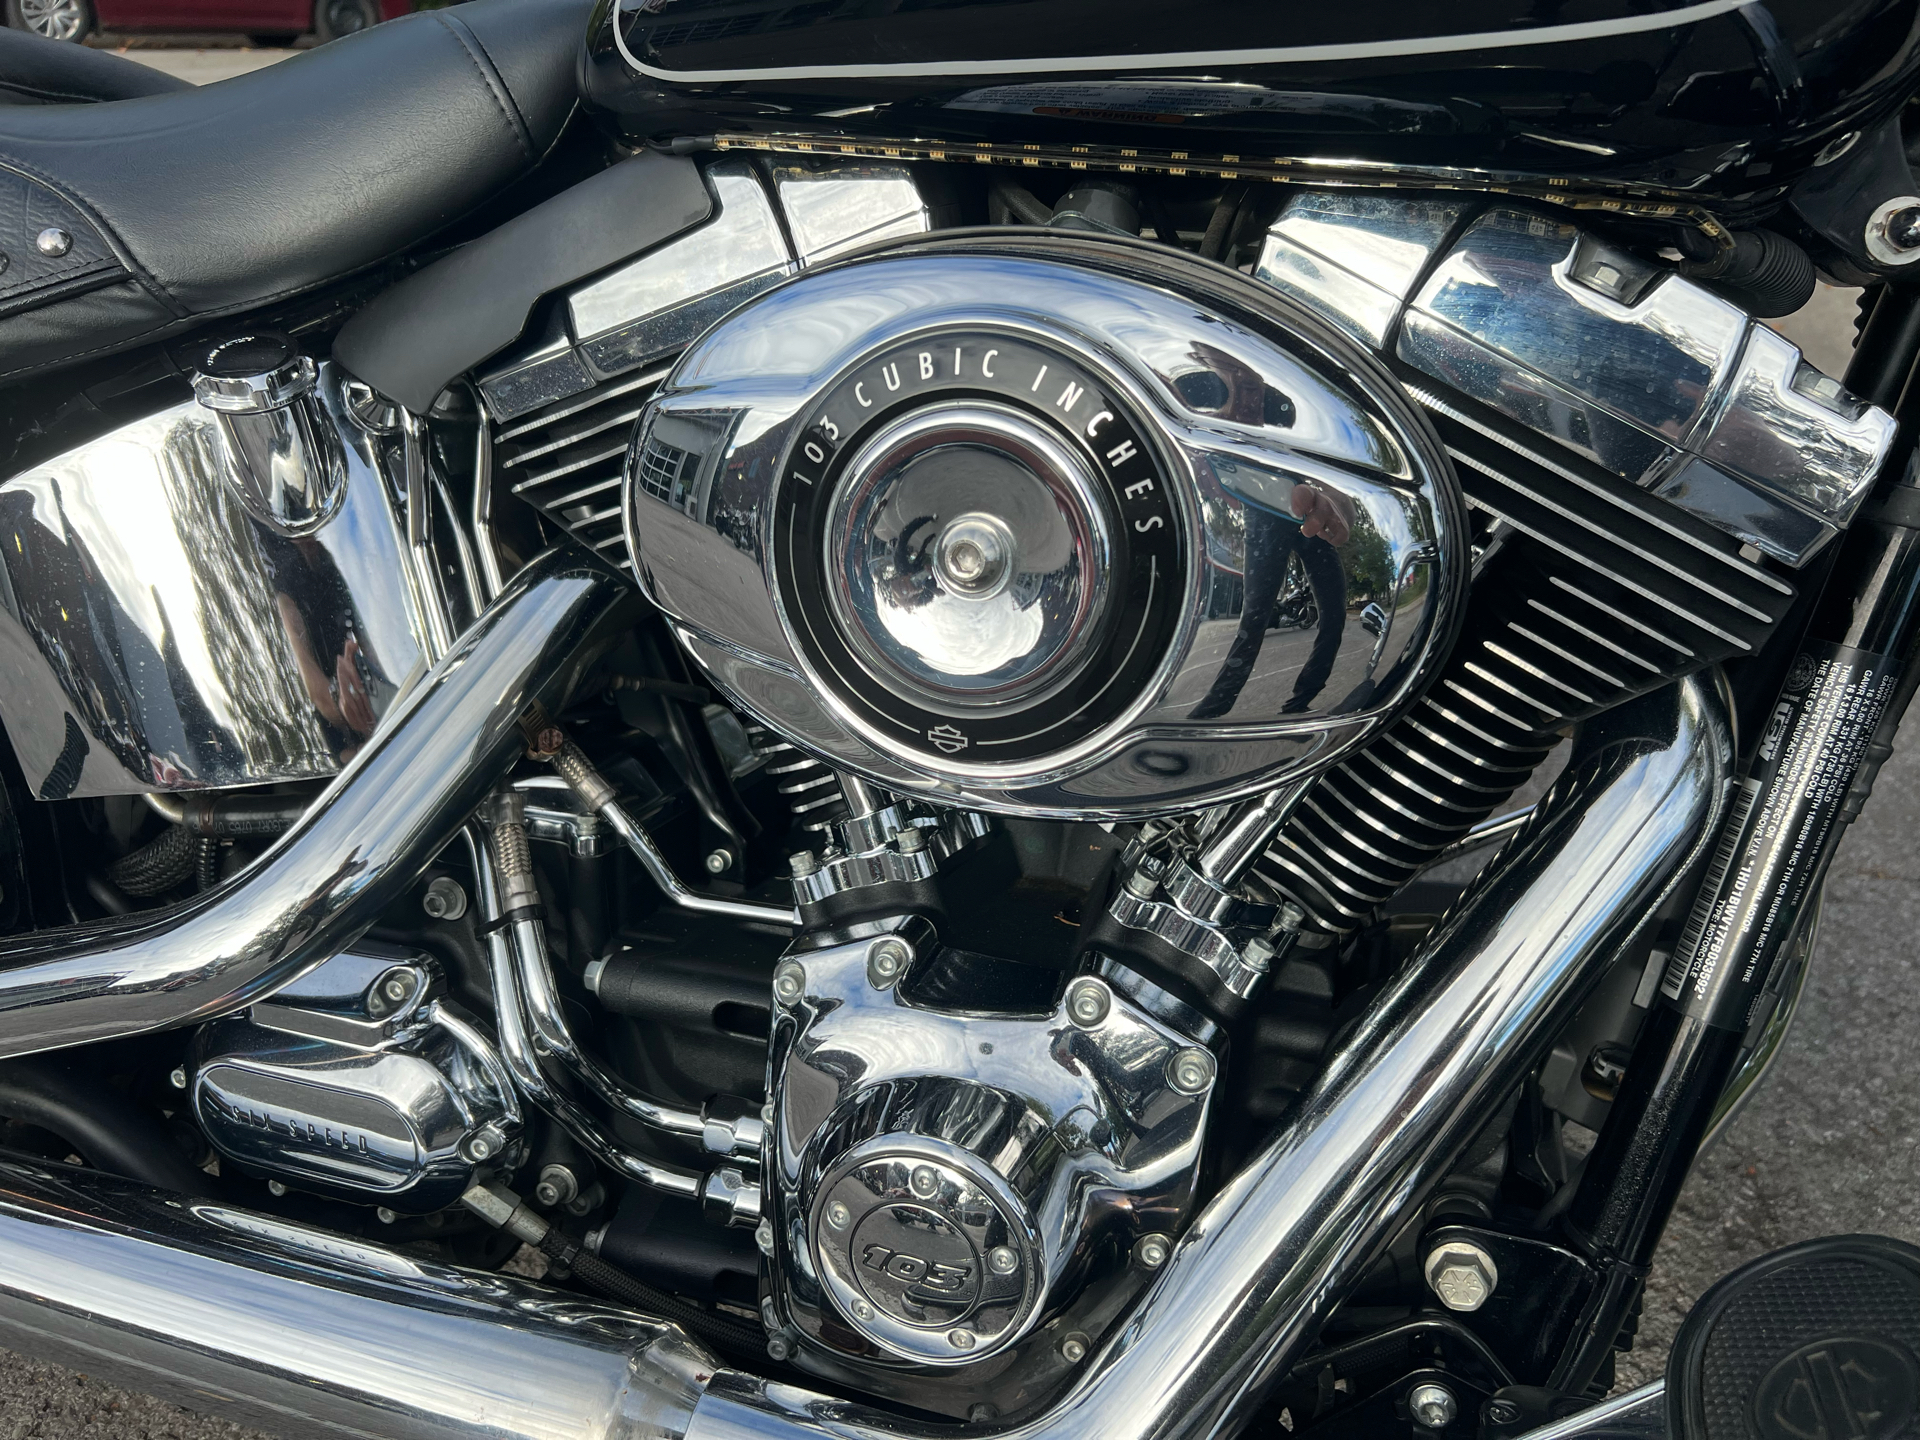 2015 Harley-Davidson Heritage Softail® Classic in Franklin, Tennessee - Photo 2